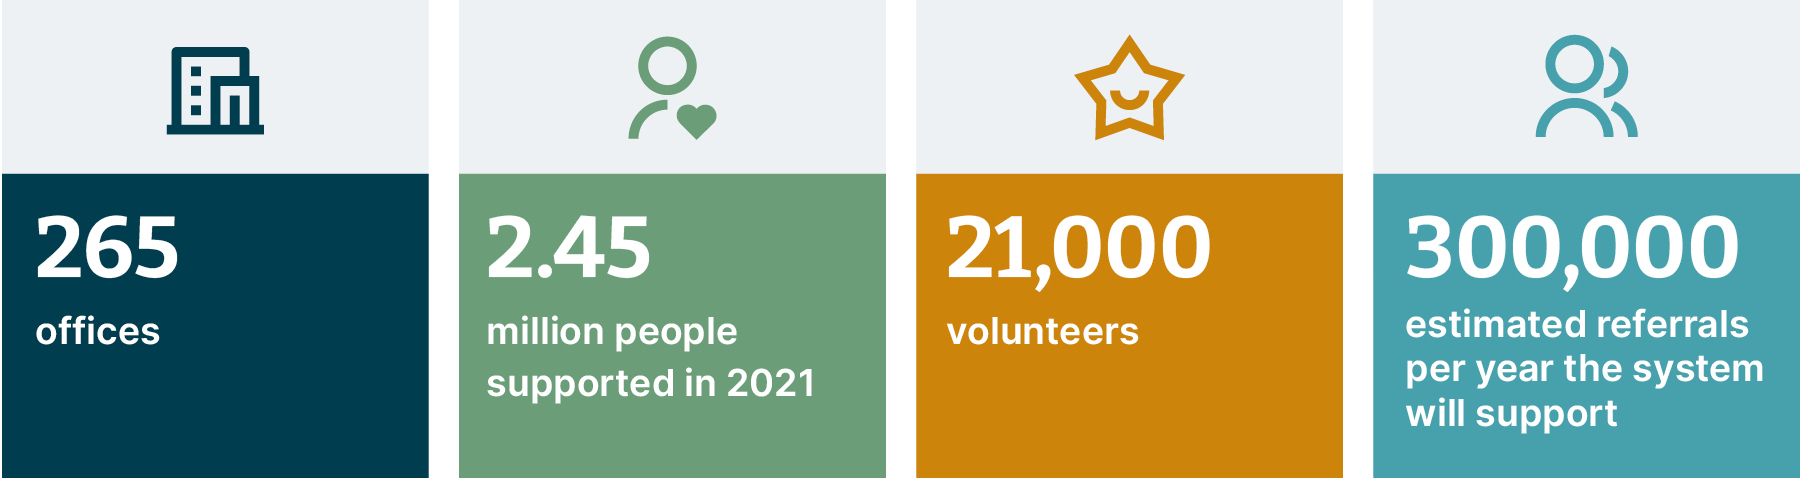 4 boxes highlighting Citizens Advice numbers: 265 offices, 2.45 million people supported in 2021, 21,000 volunteers, 300,000 estimated referrals per year the system will support. 